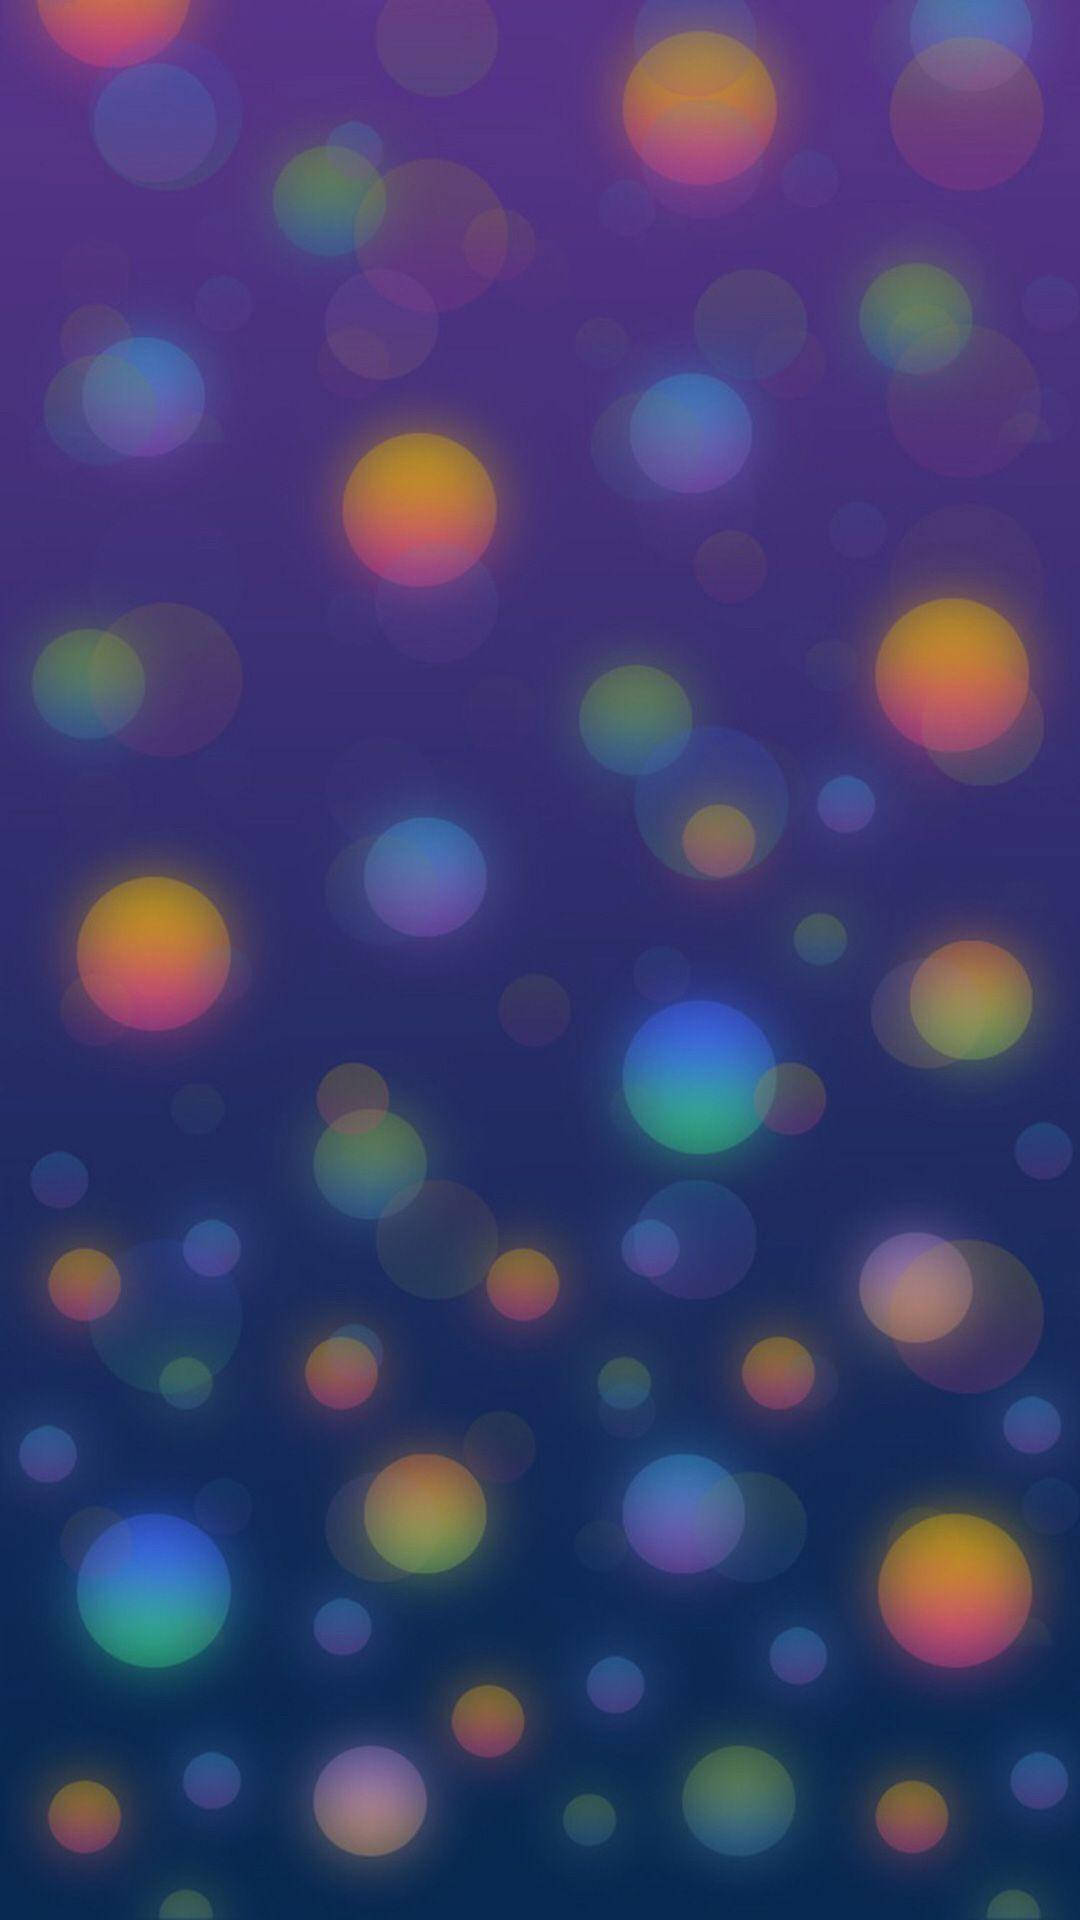 Colorful Blurry Dots Iphone 8 Live Background